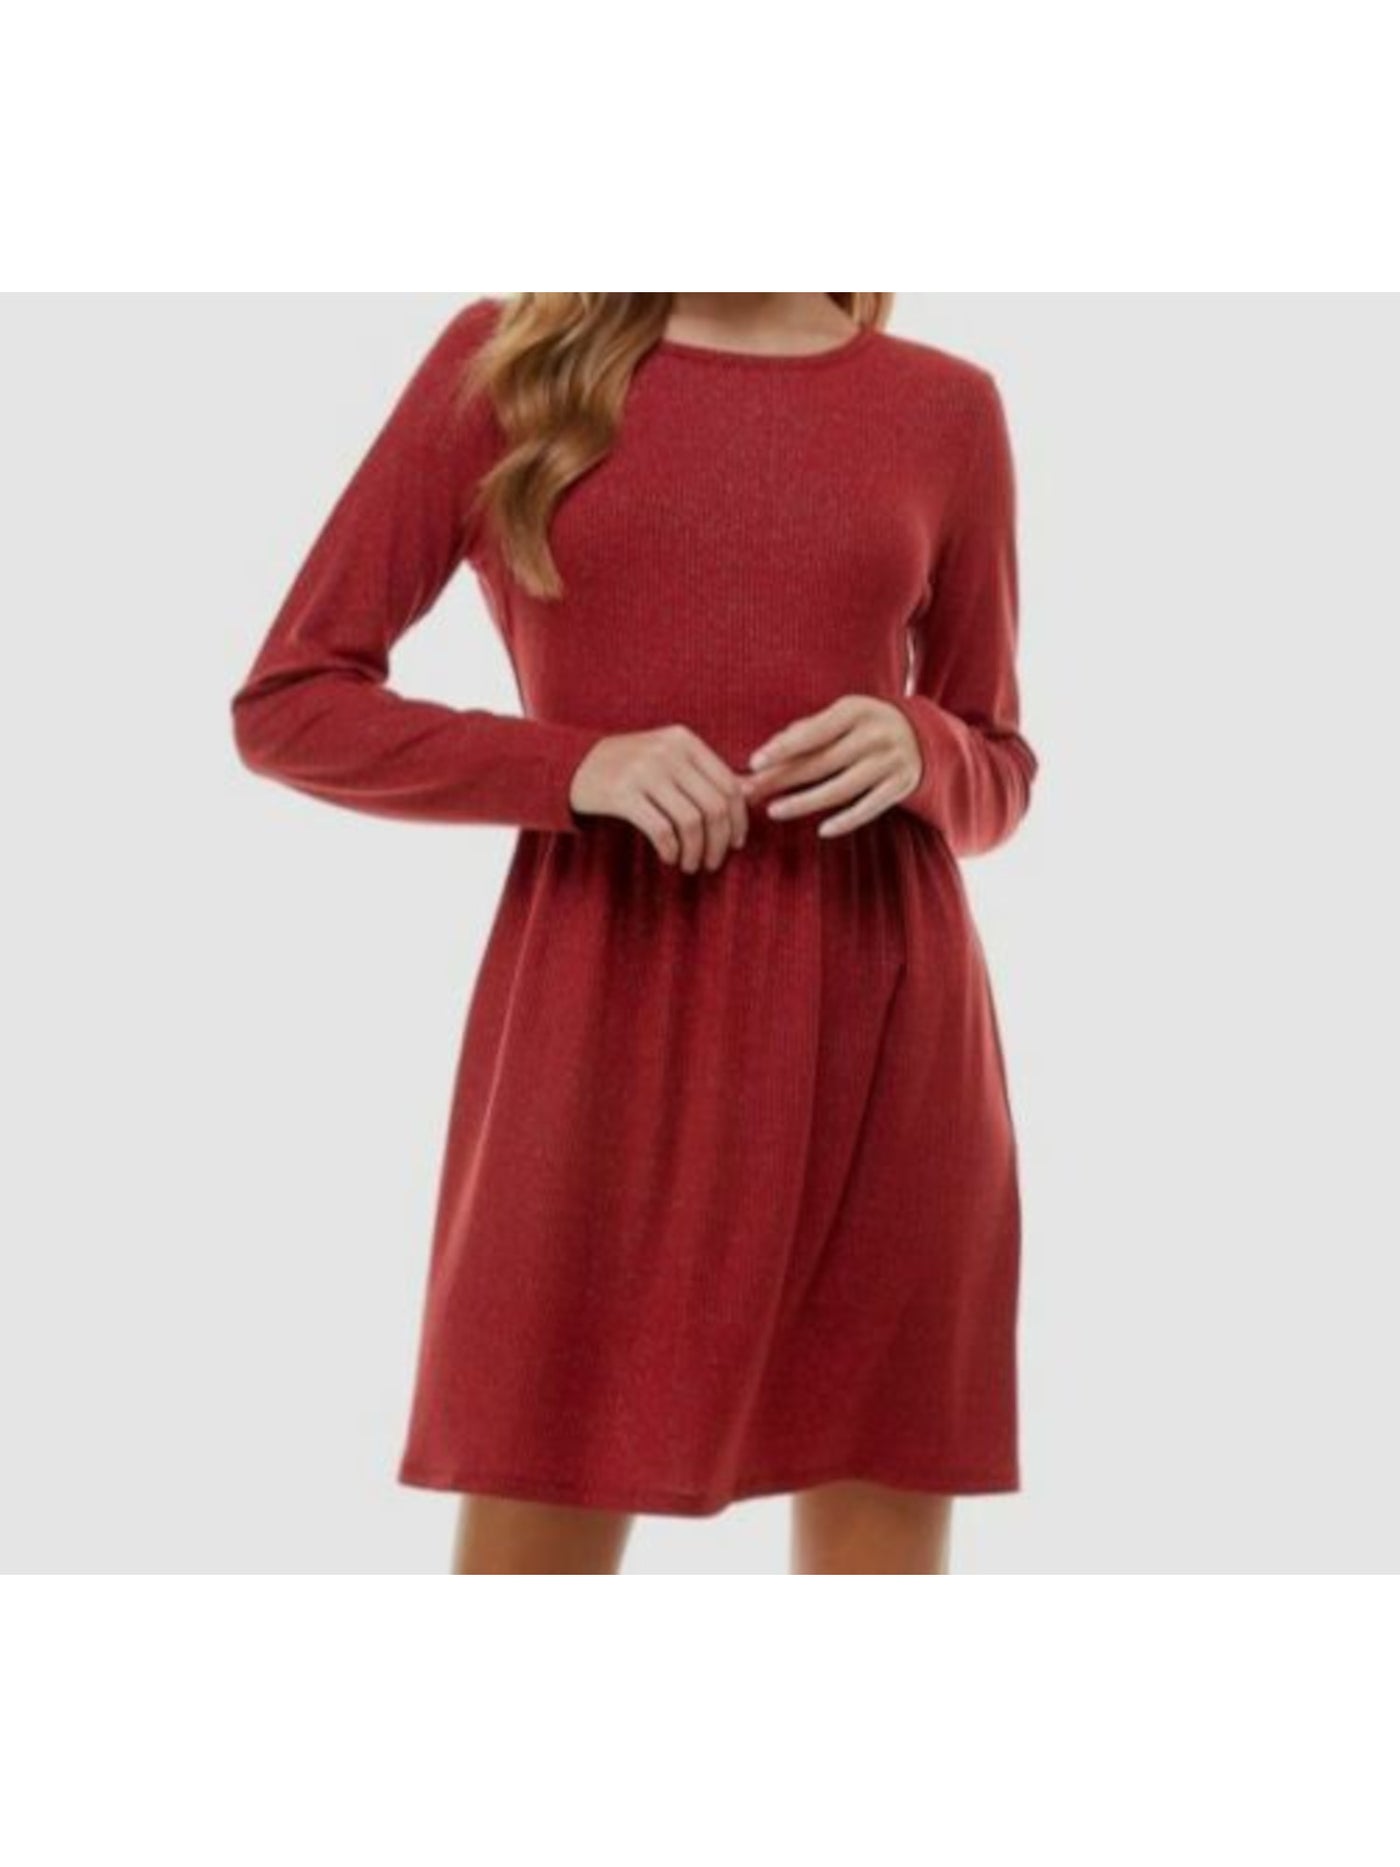 BEBOP Womens Burgundy Stretch Ribbed Pleated Pullover Long Sleeve Jewel Neck Short Party Baby Doll Dress M